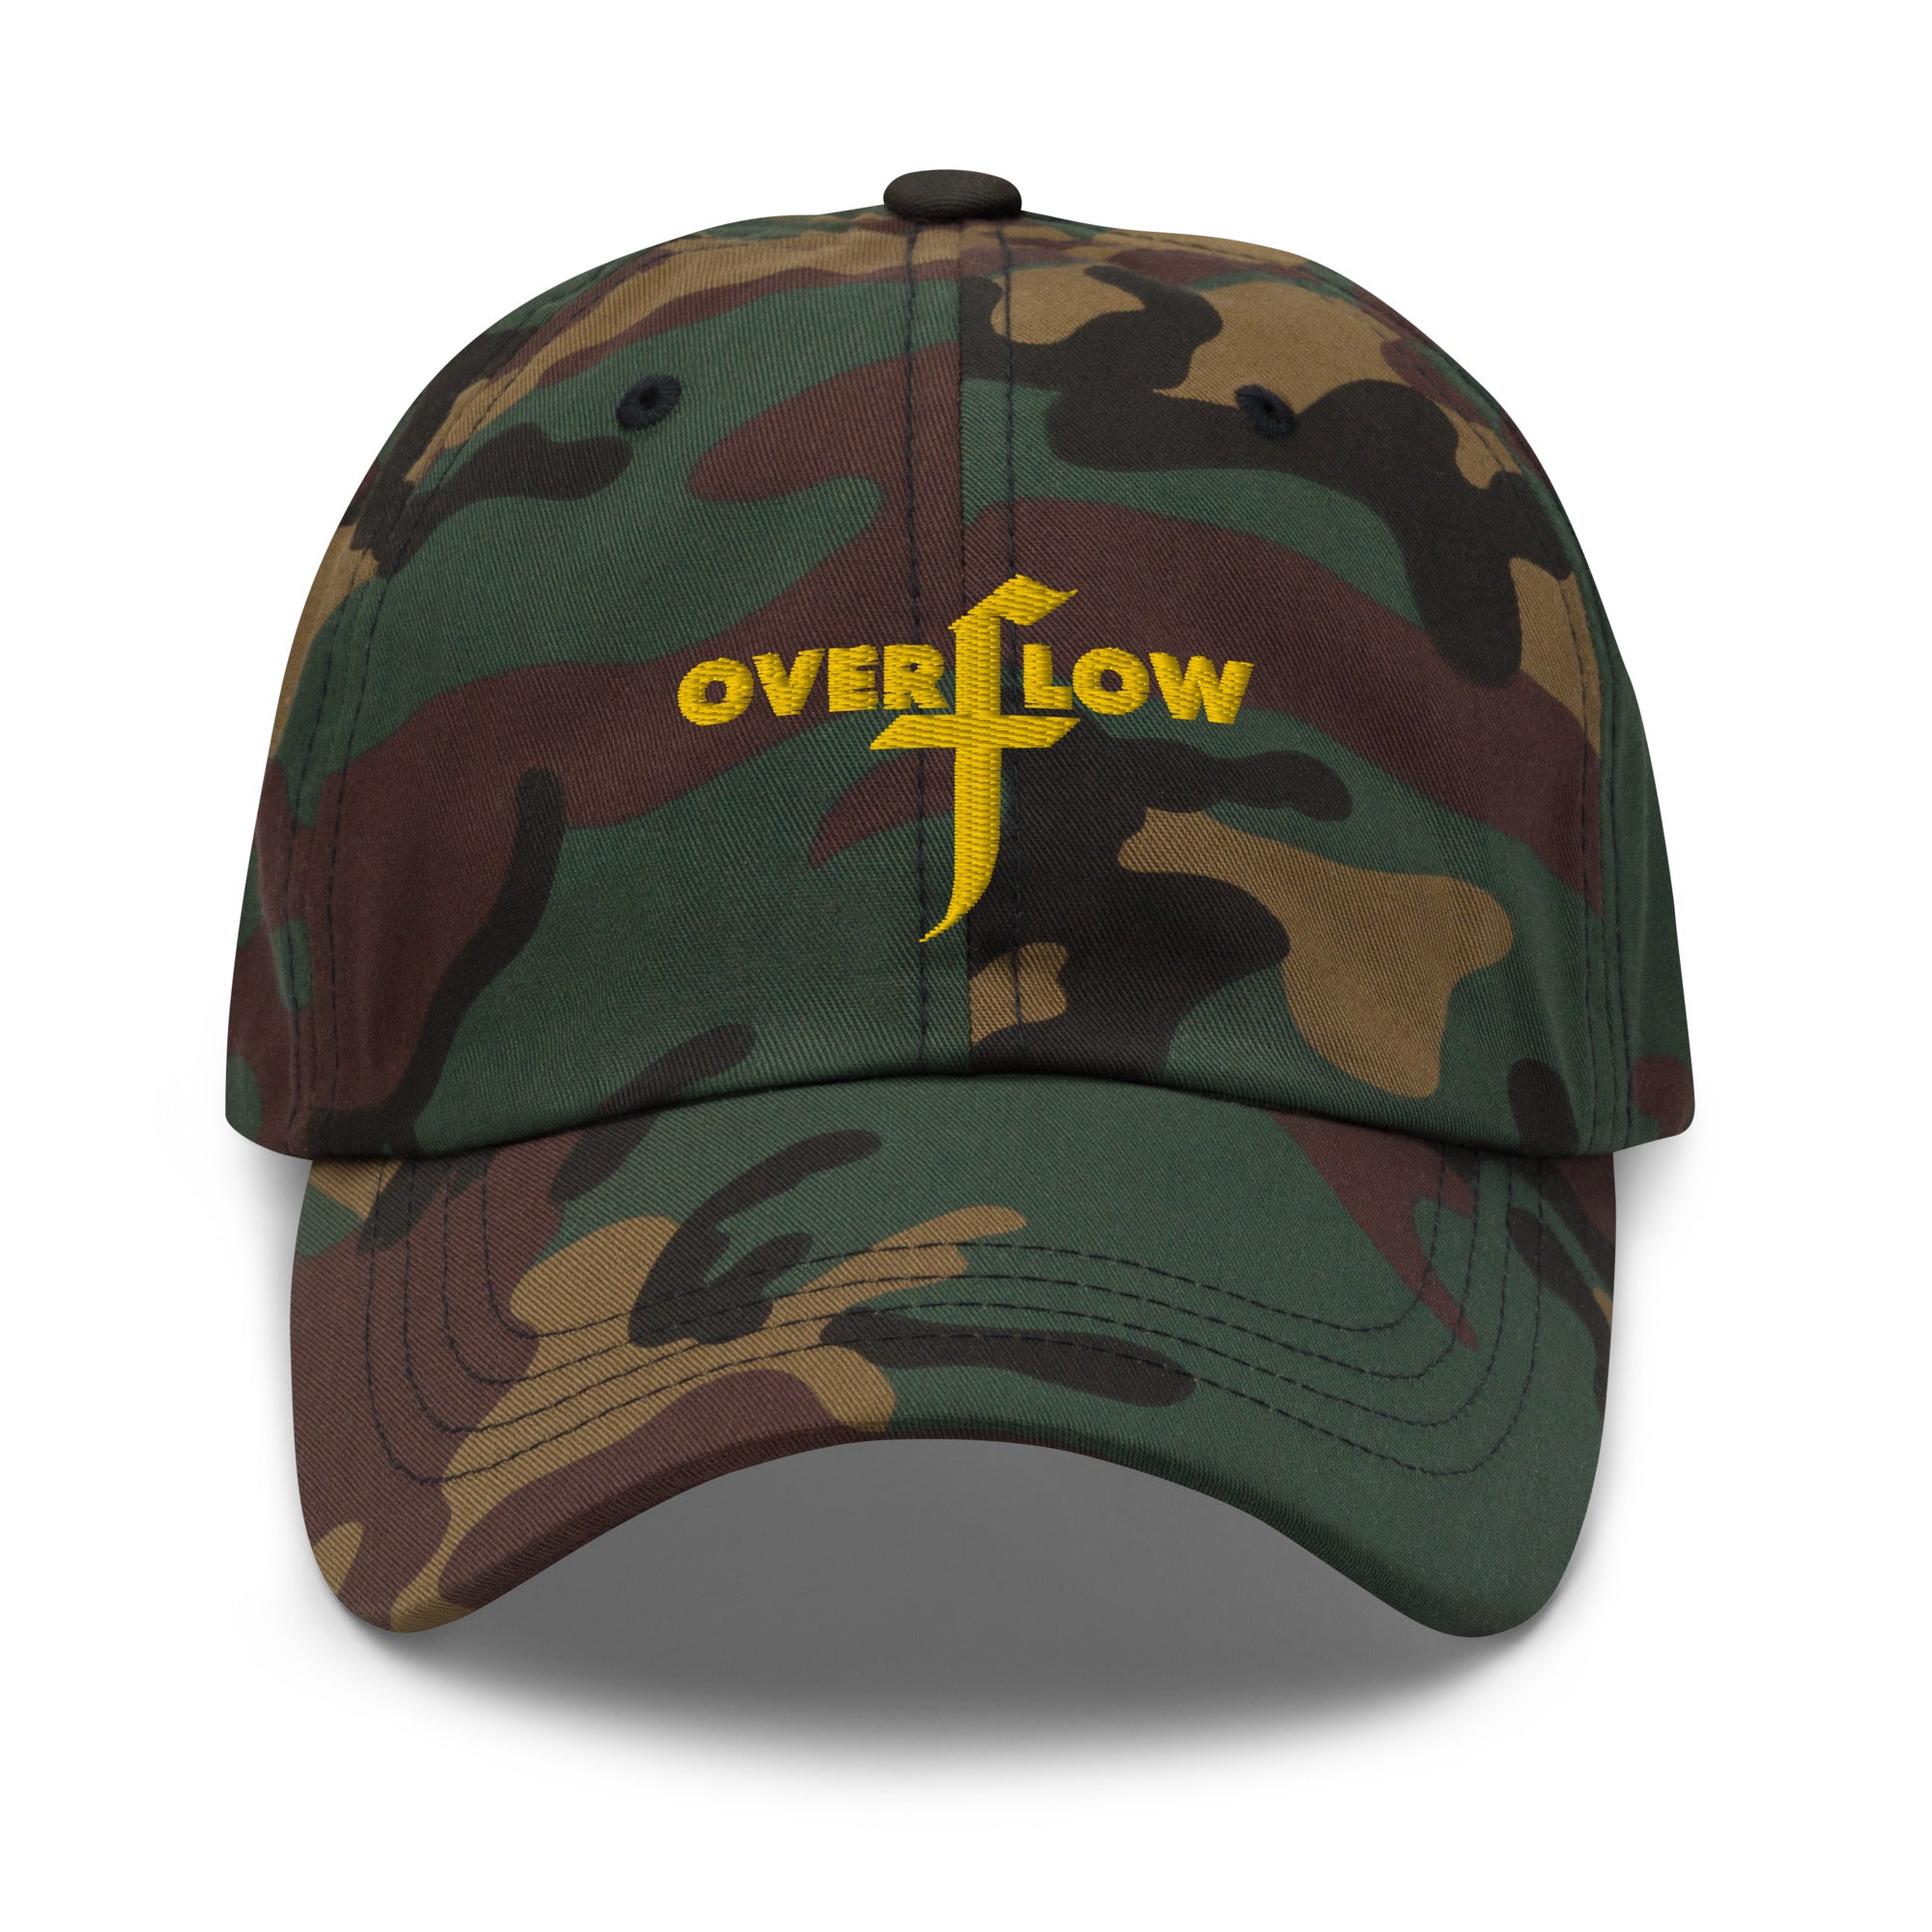 overflow, christian hat, used by god, god is dope, active faith sports, art of homage, christian apparel, elevated faith